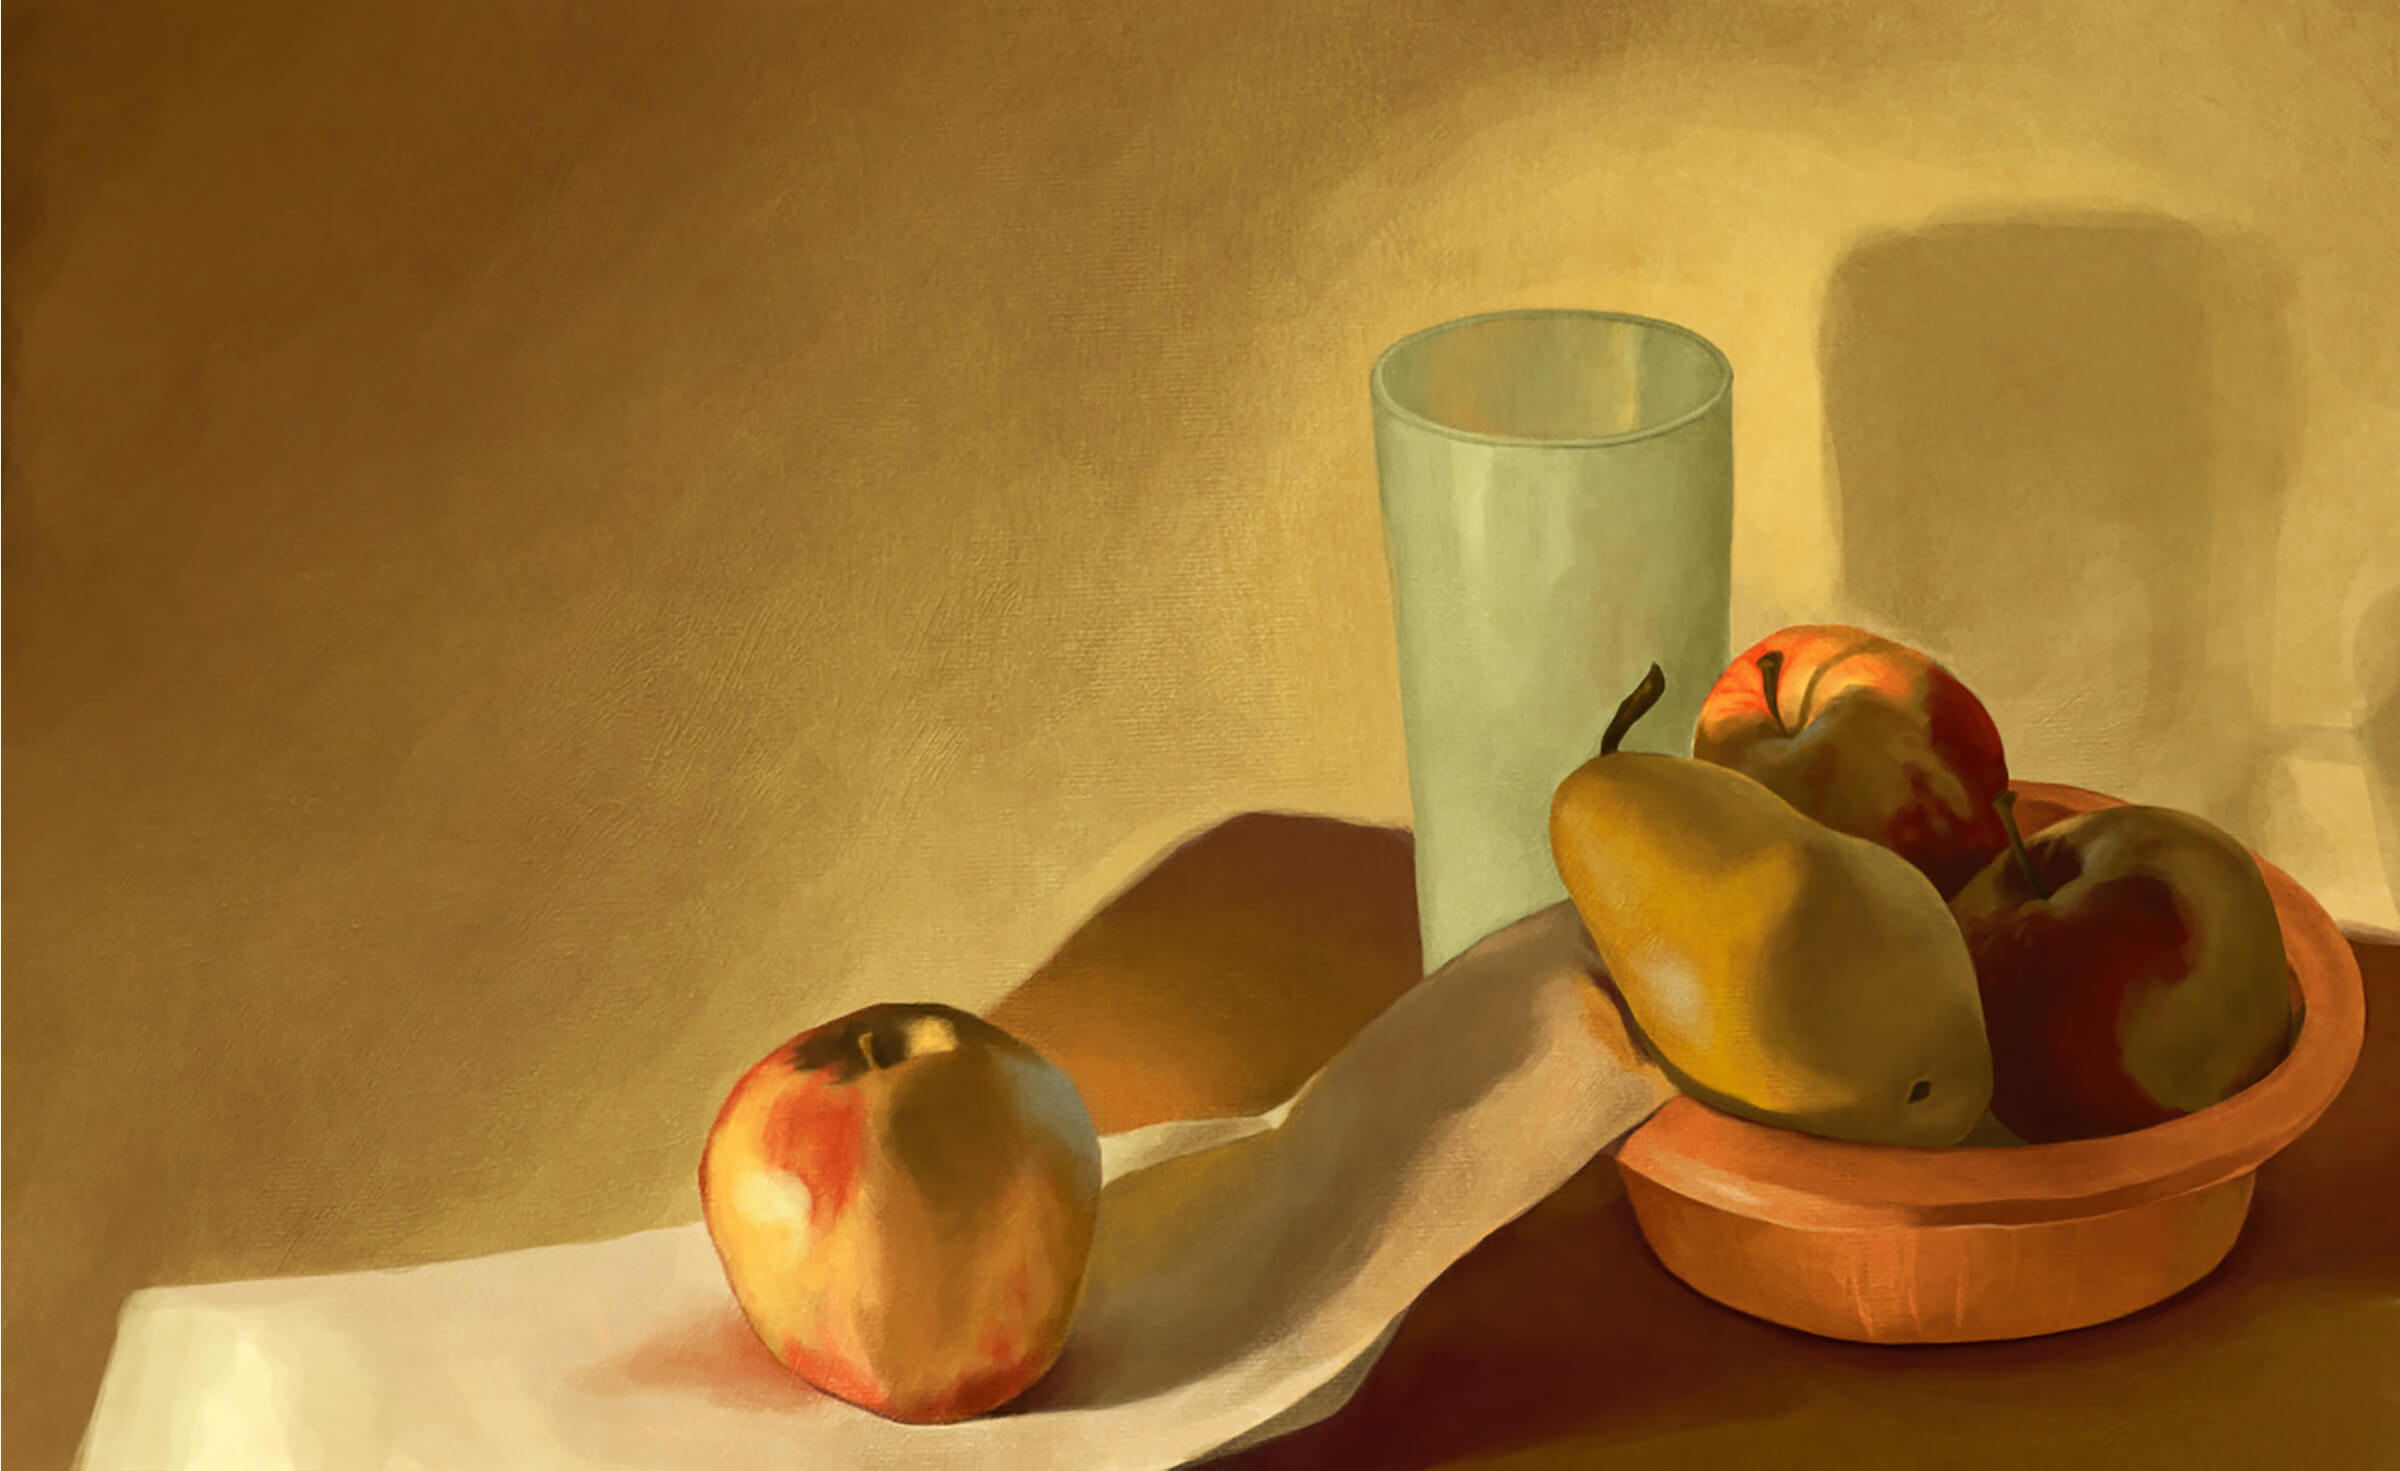 still-life traditional painting of bowl with apples and a pear, a glass, and another apple on a draped white napkin